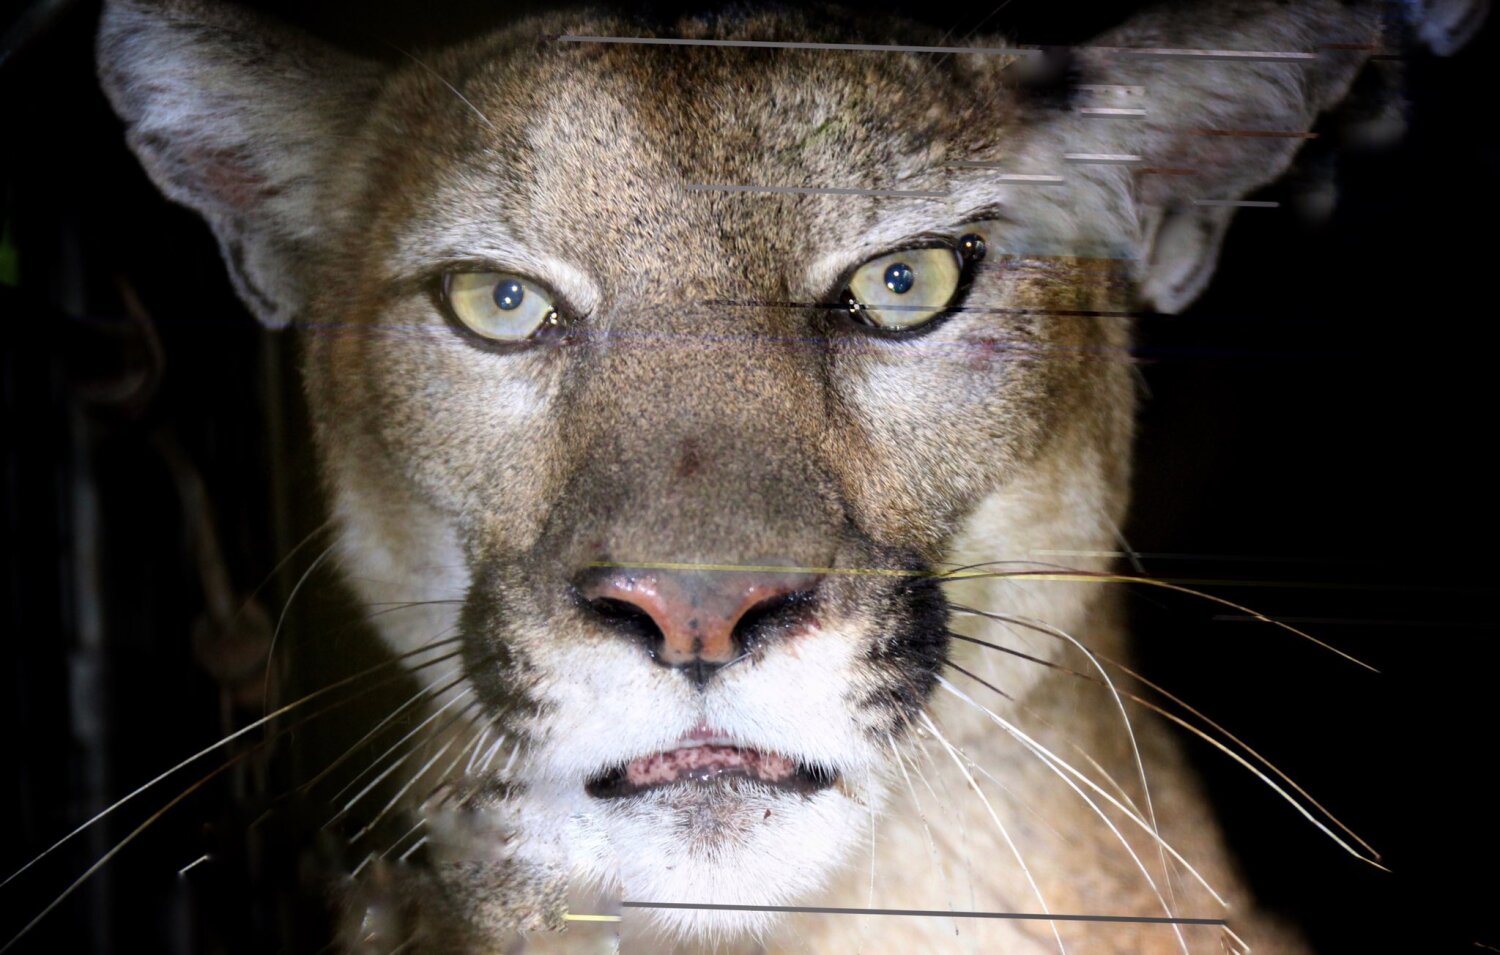 Meet P-80, a mountain lion captured and collared in the Woolsey fire area